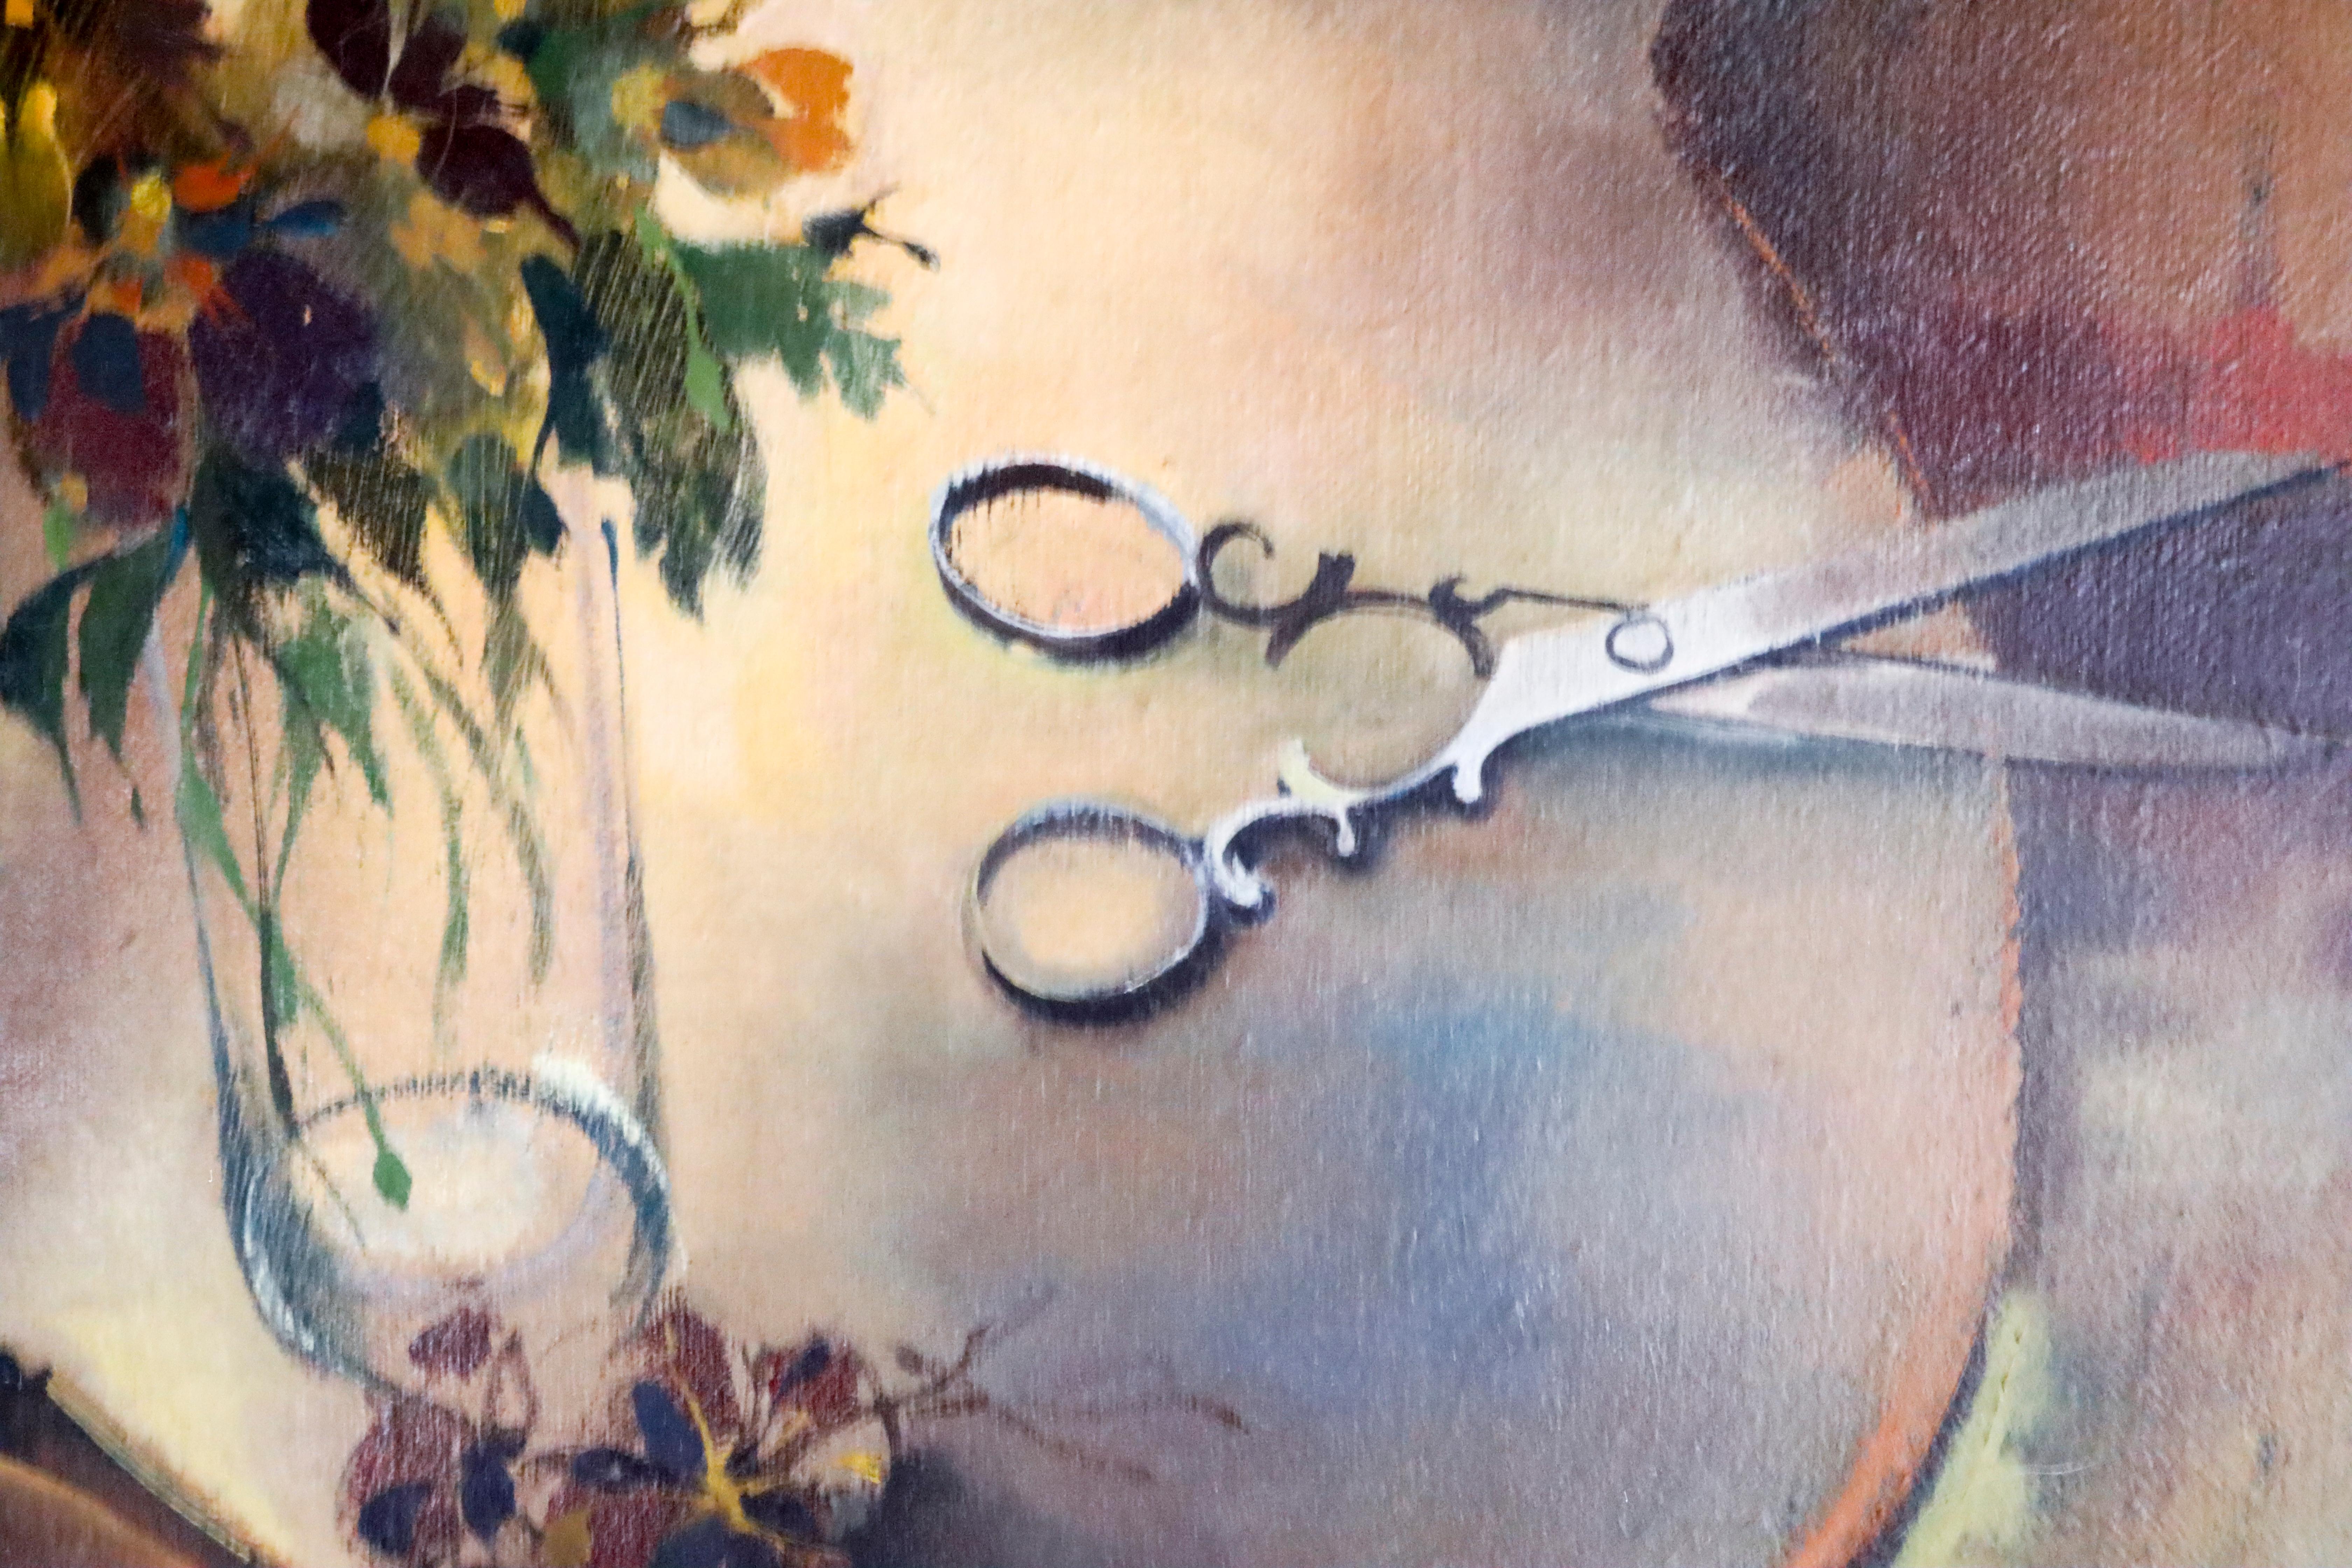 Nantucket  artist Reggie Levine, evolved from his figurative work in the 40's-50's to abstract in the 1960's and later to found object art.  Interestingly I see his interest in found objects assemblages, in this painting, adding a pair of scissors